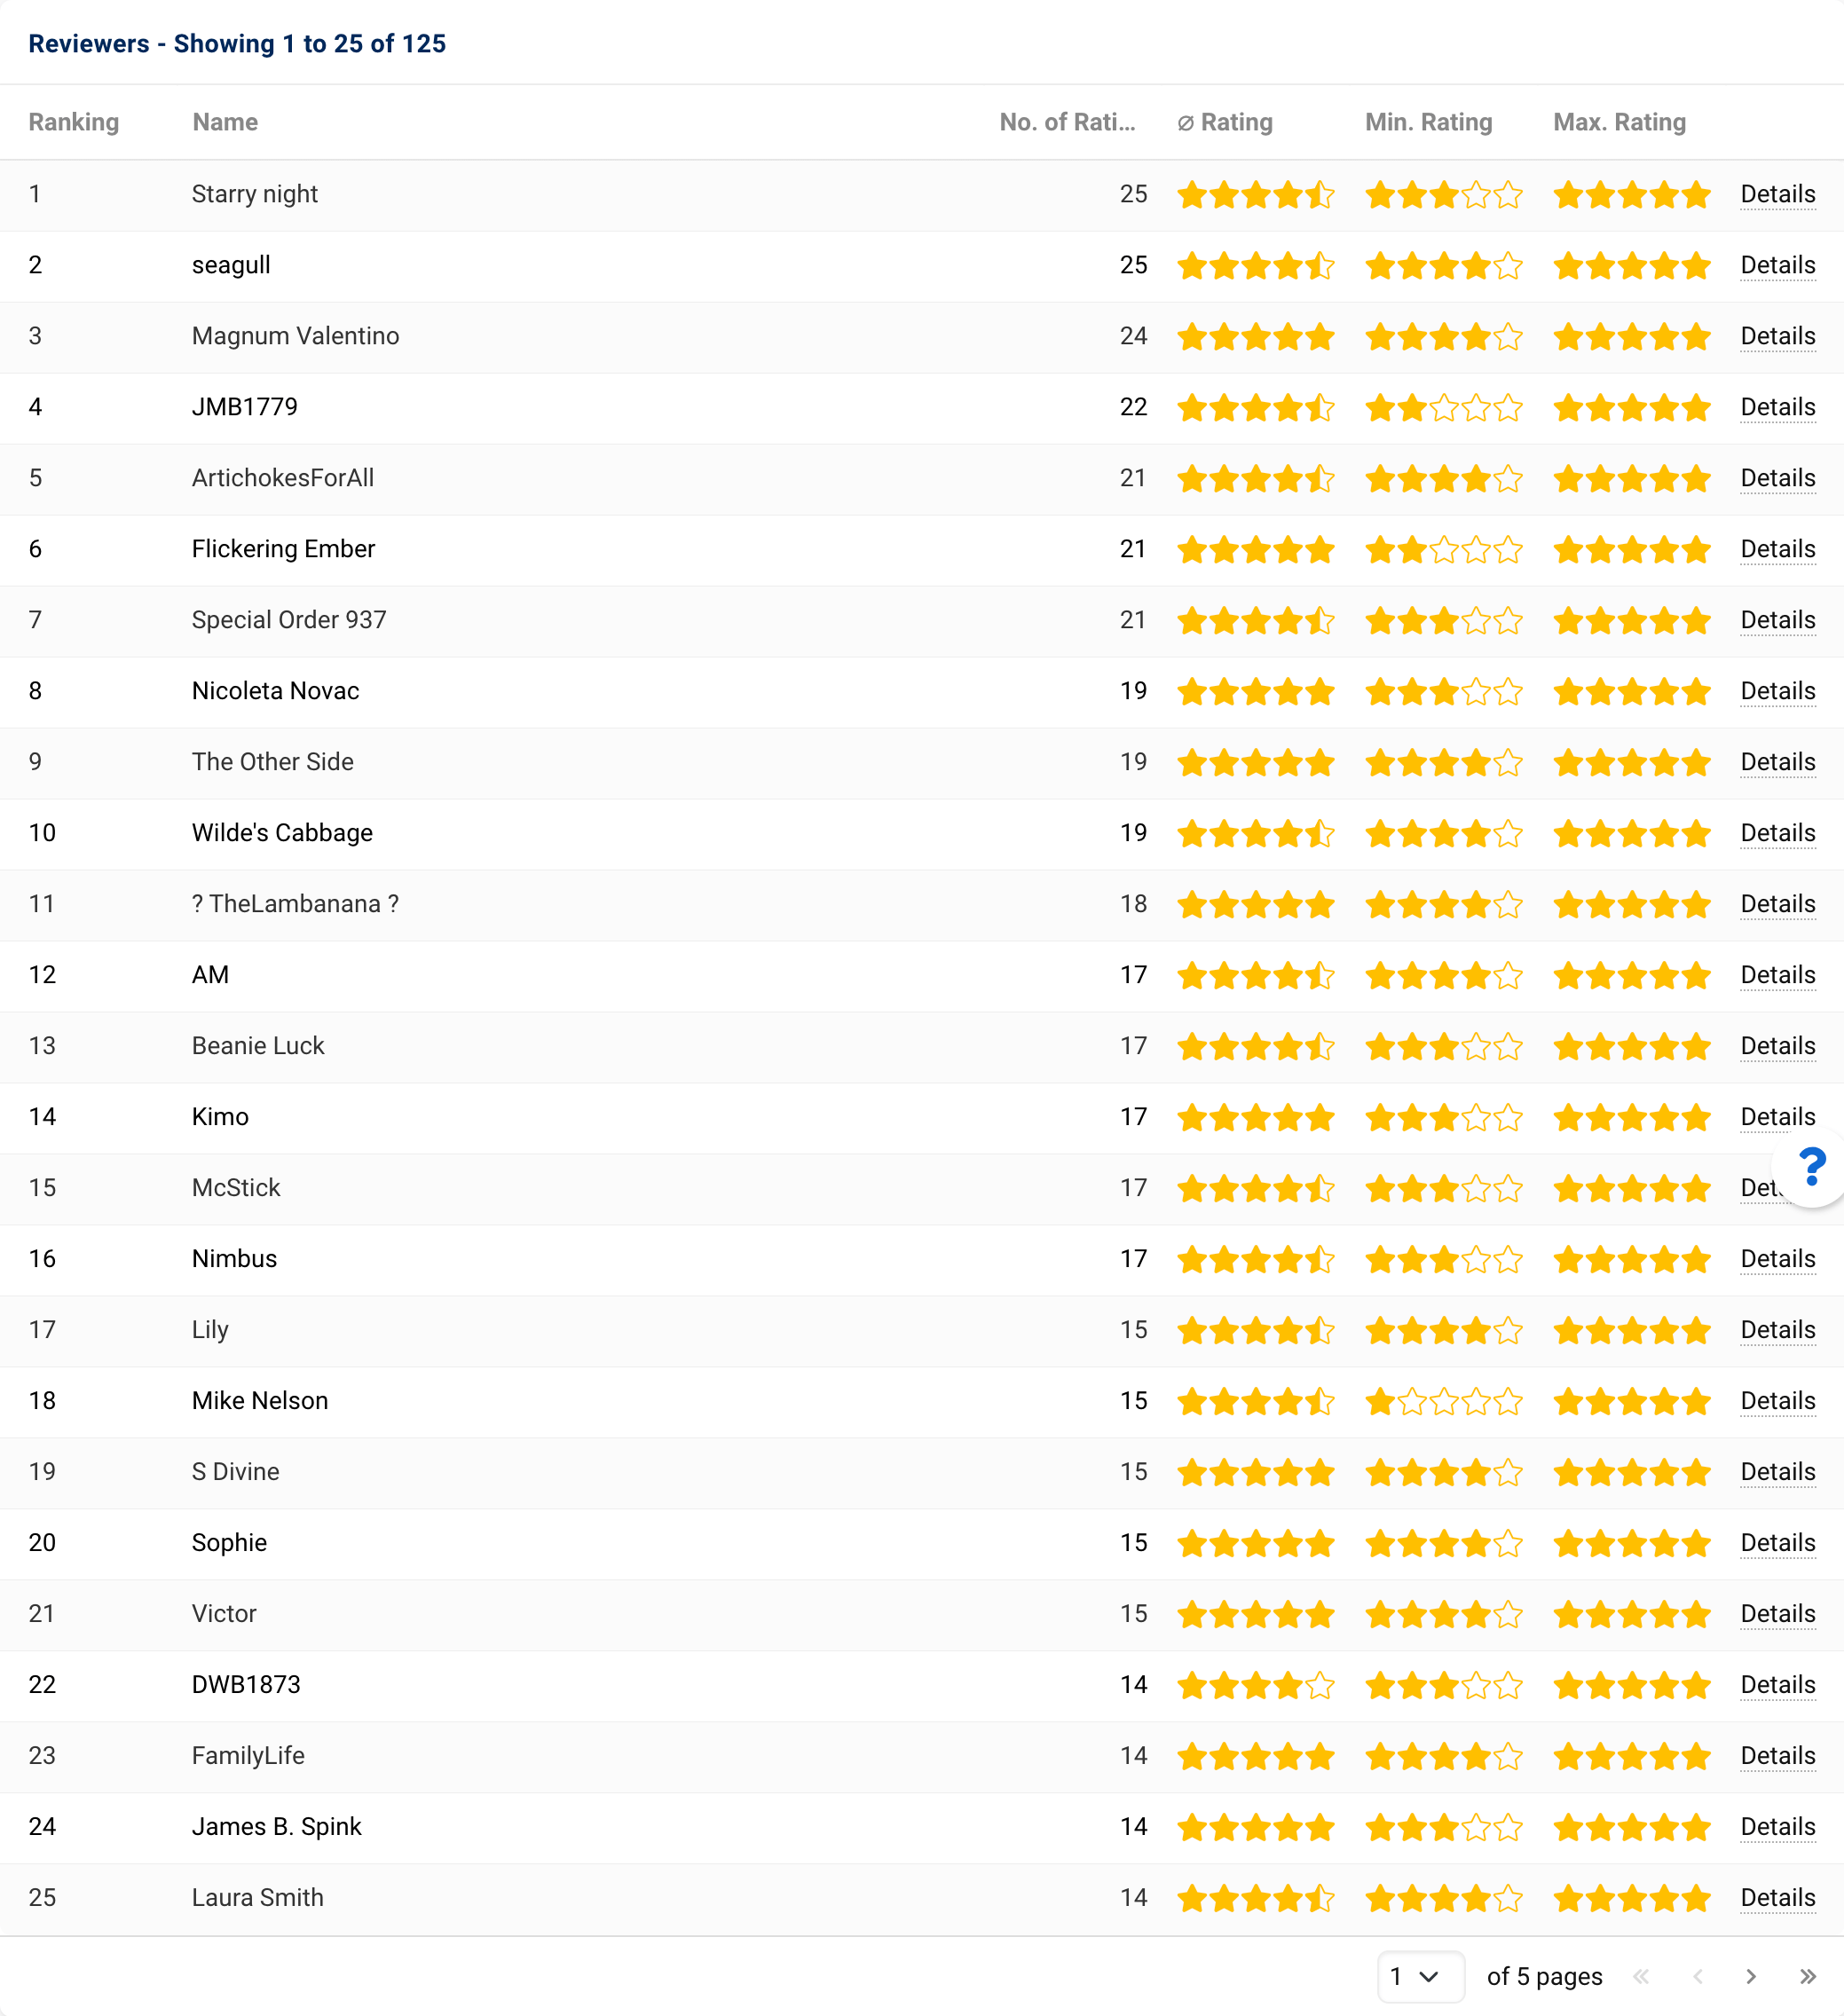 Brand reviewers list on Amazon